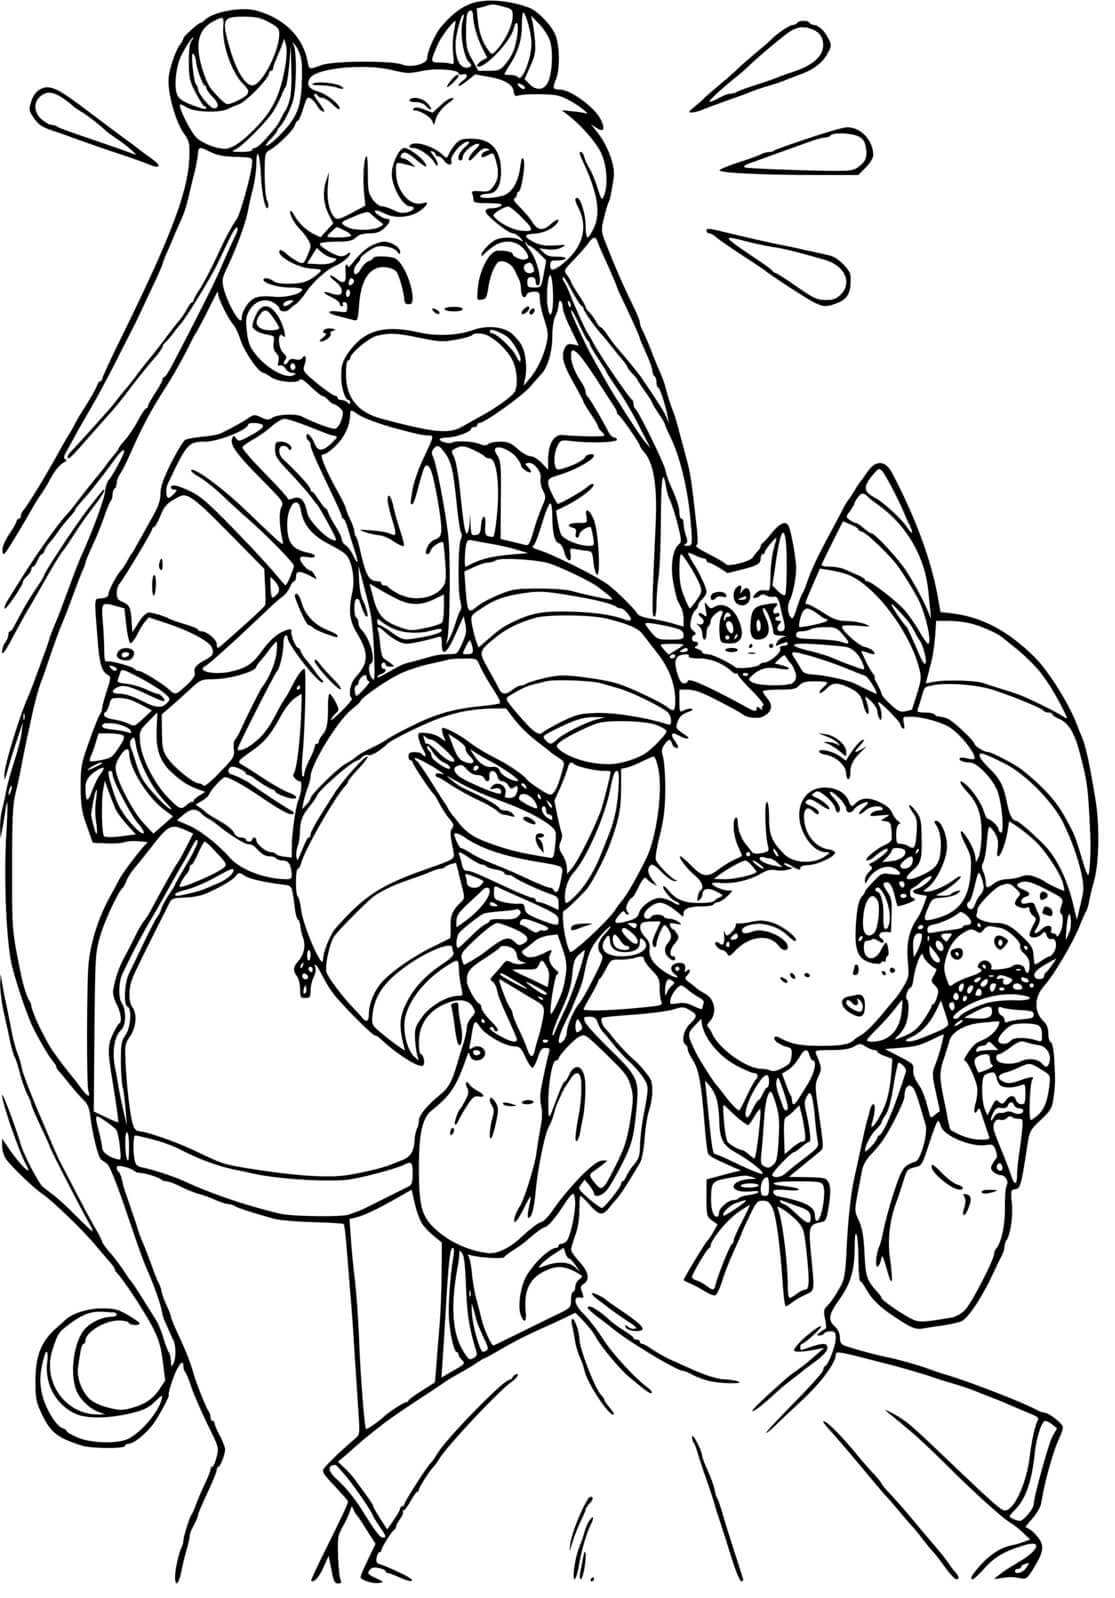 Sailor Moon Characters Coloring Page